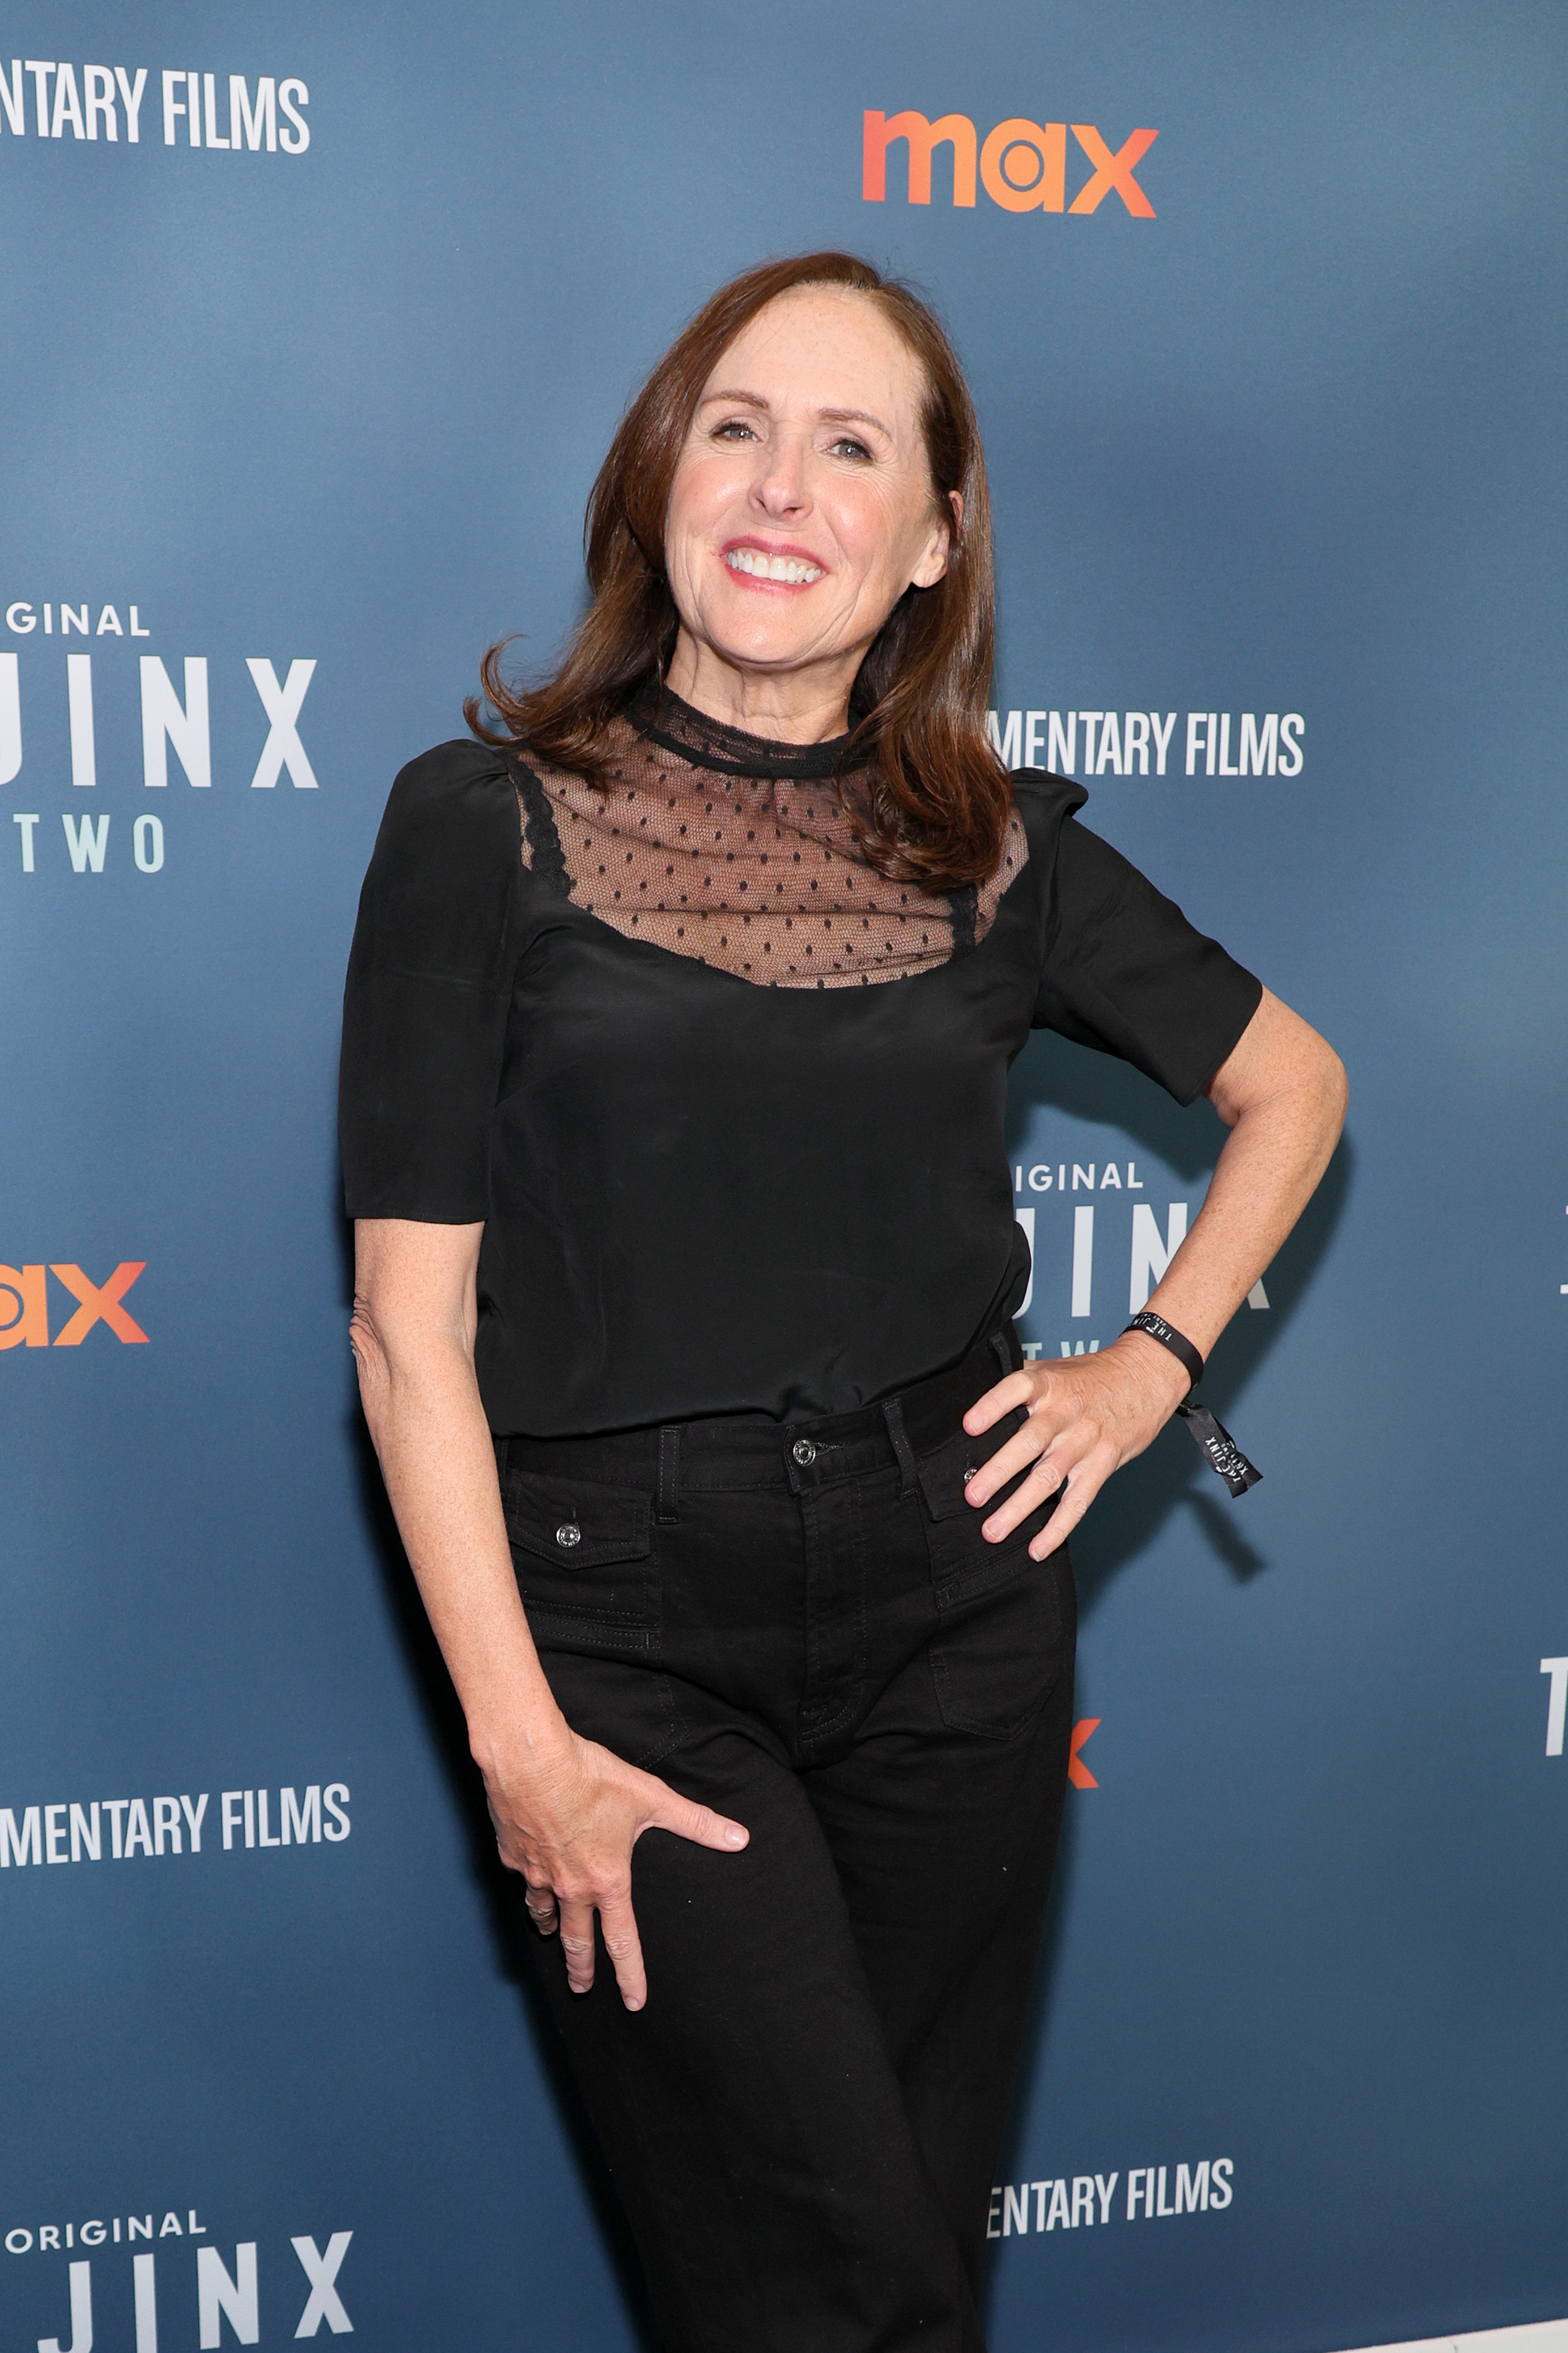 Molly Shannon posing on the red carpet, wearing a sheer black top and black pants, at an event for Max Original&#x27;s documentary films